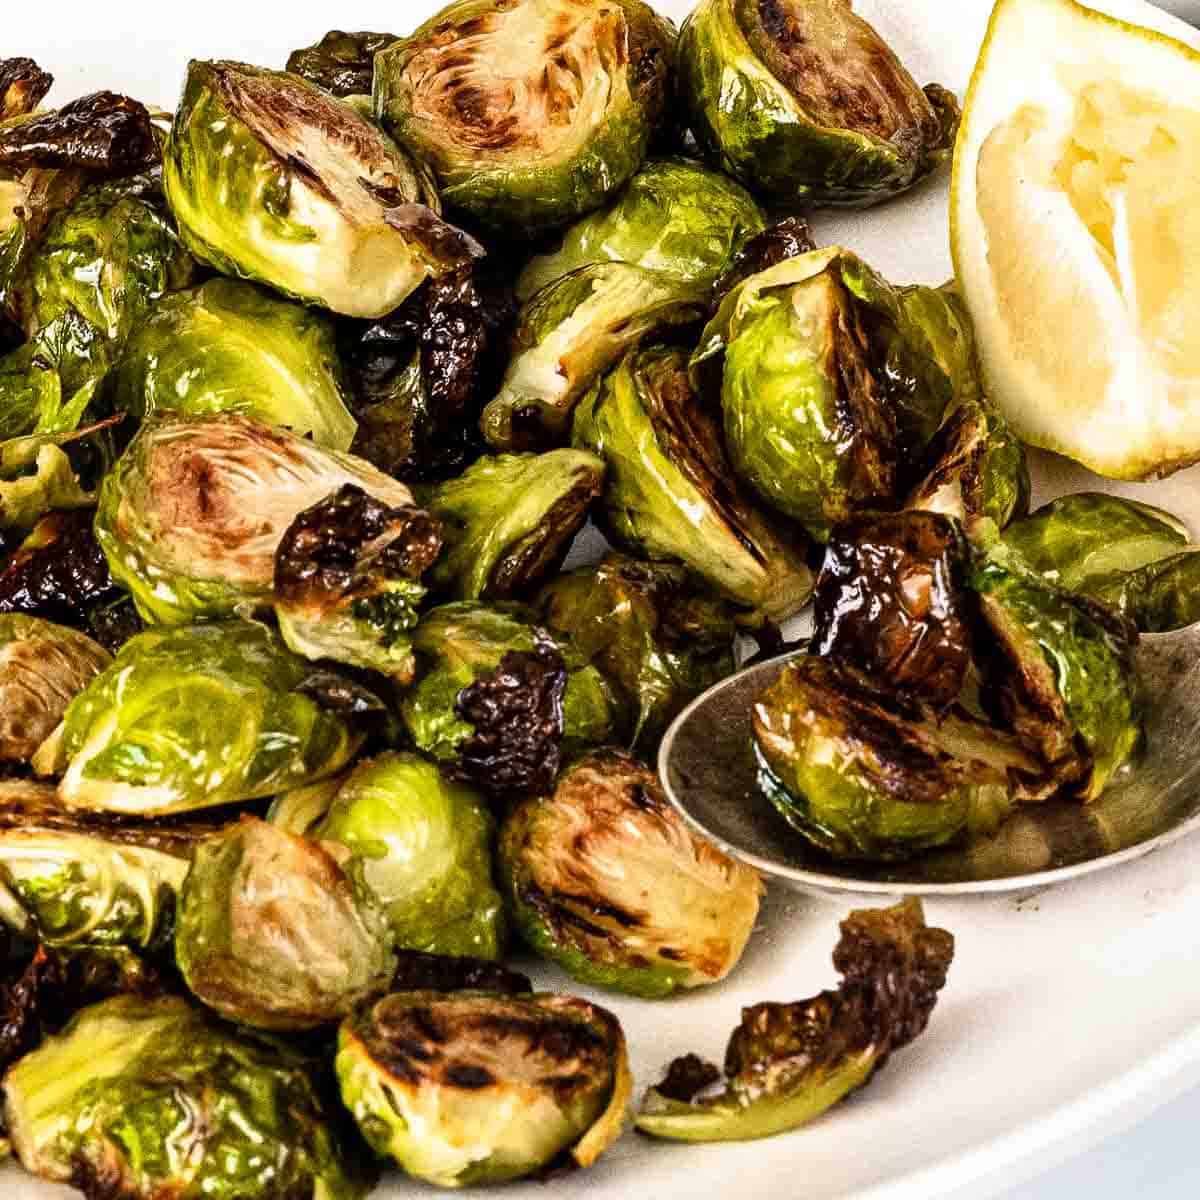 Roasted Brussels sprouts on a white plate with q lemon wedge.